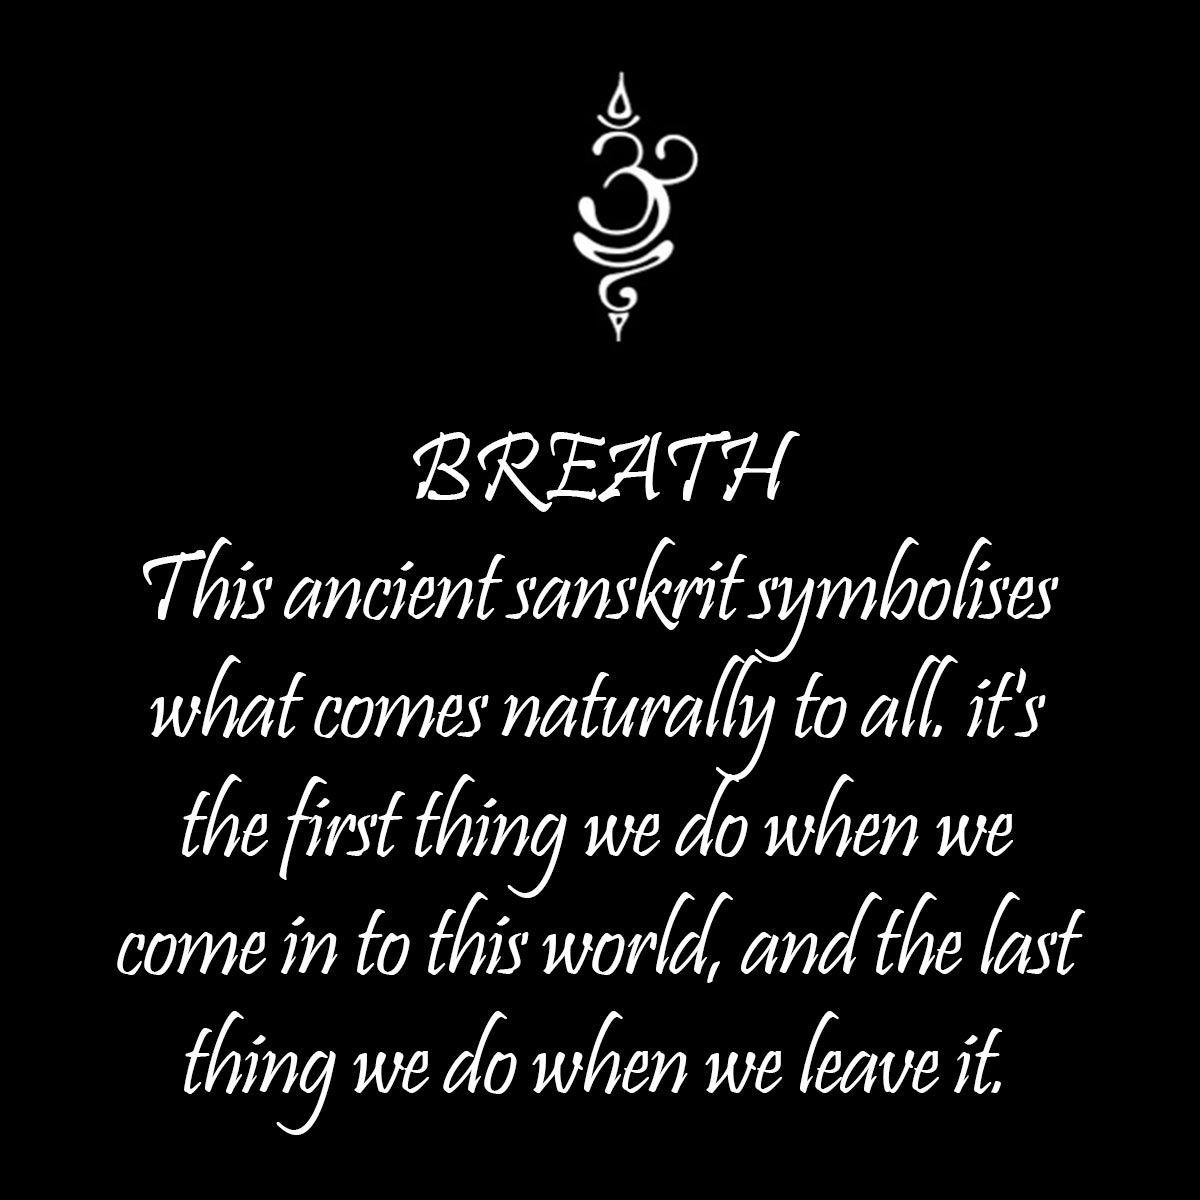 BREATH: This ancient sanskrit symbolises what comes naturally to all. it's the first thing we do when we come in to this world, and the last thing we do when we leave it.